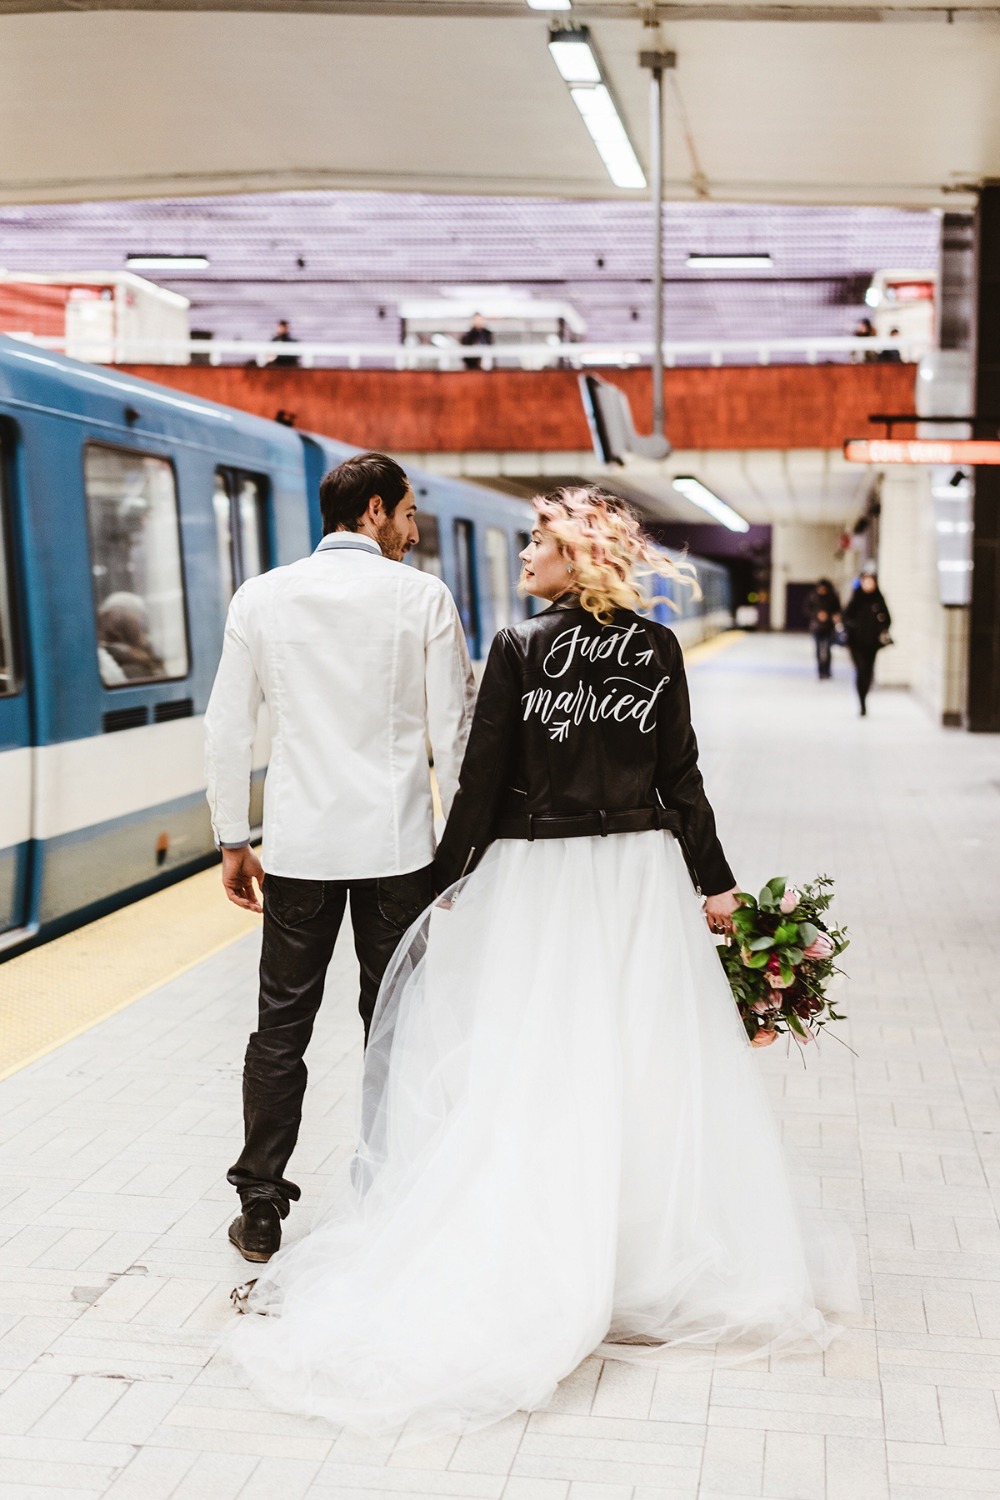 catching a train on your wedding day